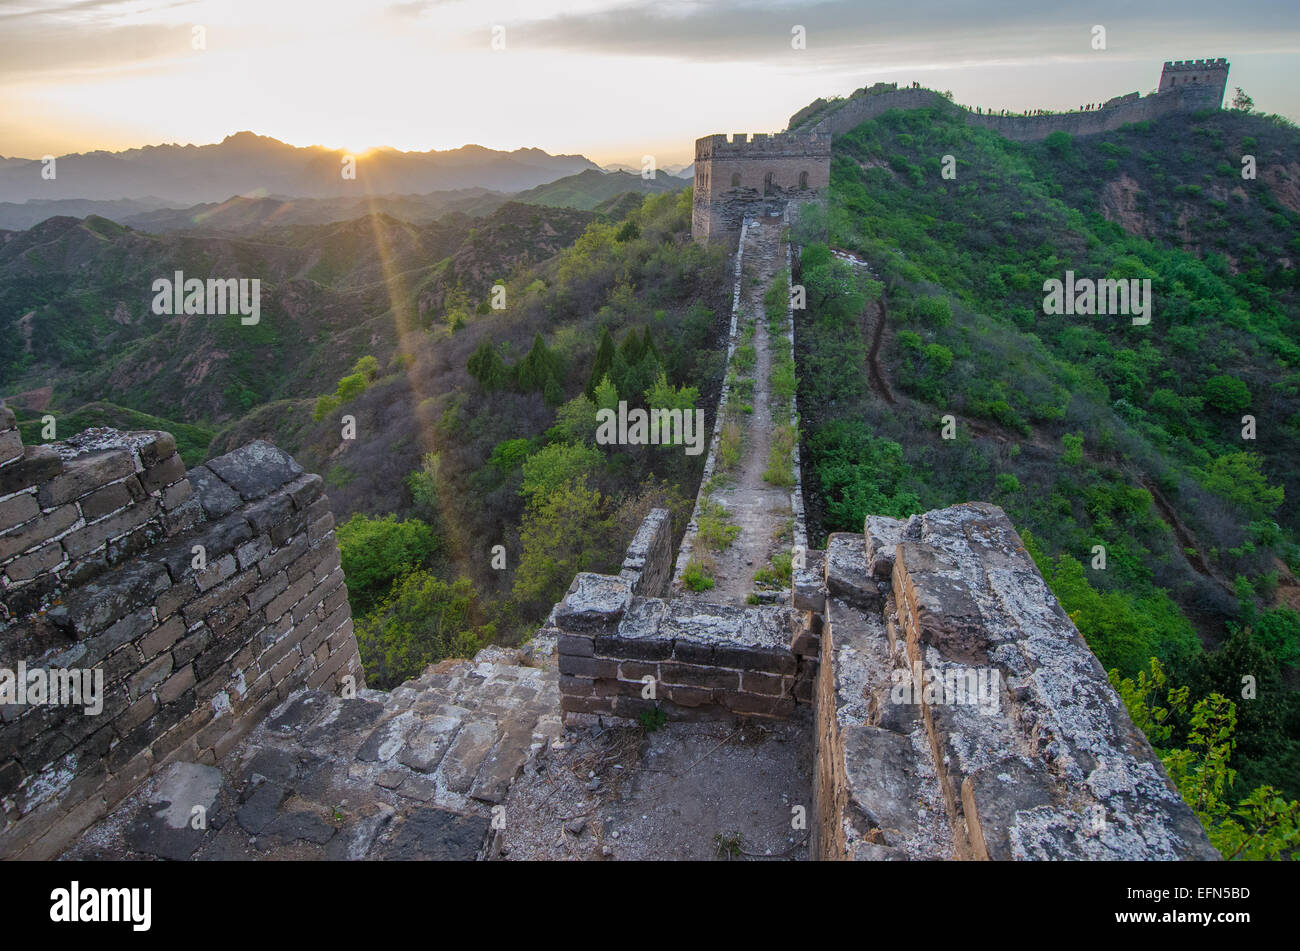 The 2,300 year old Great Wall of China is illuminated by the setting sun. Stock Photo